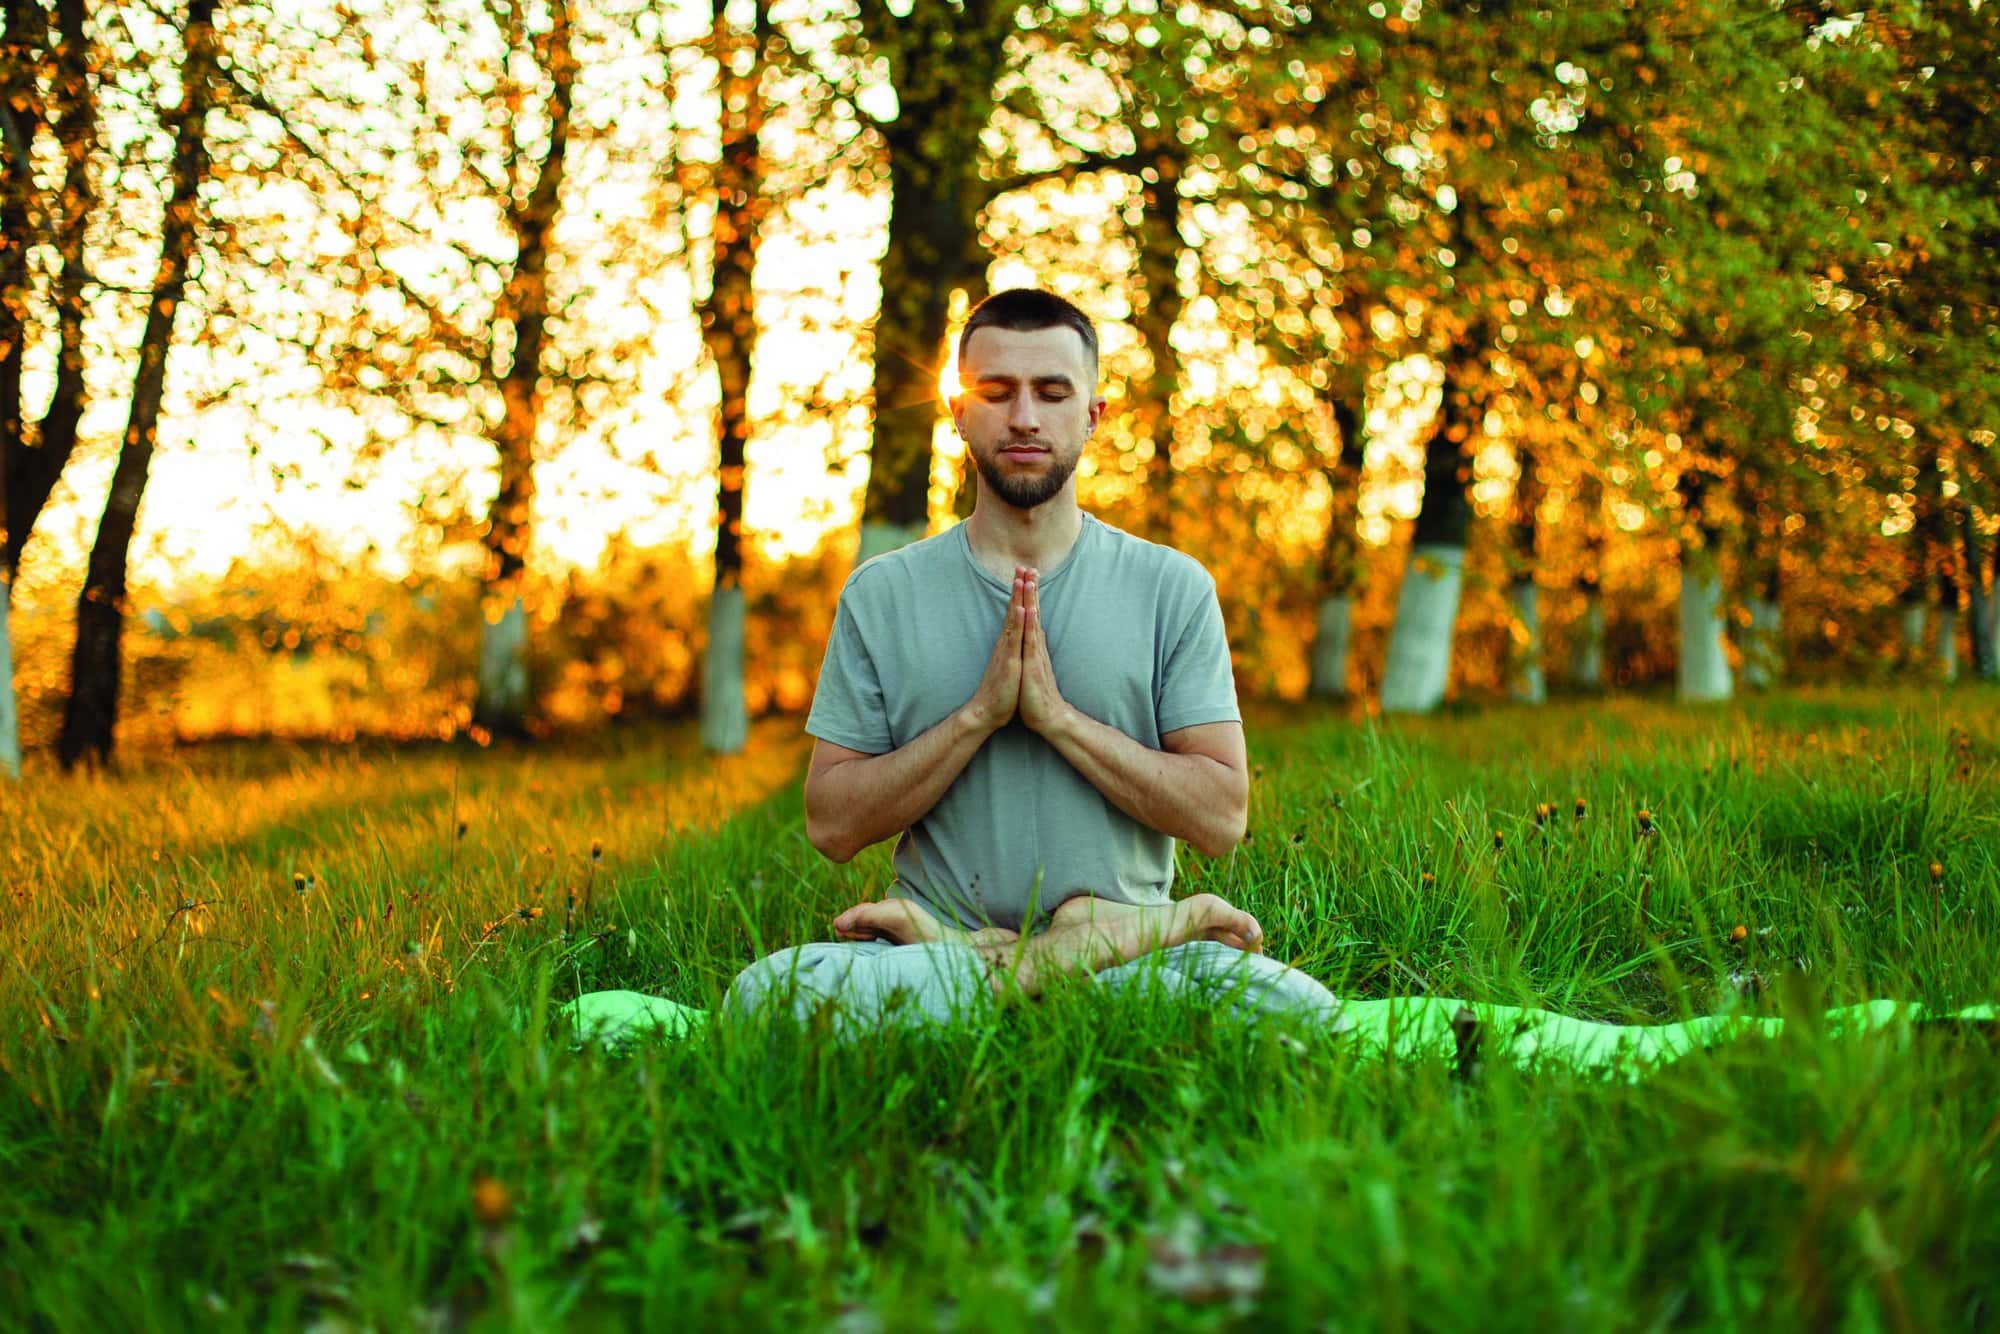 Man meditating in a park at sunset. Healthy lifestyle